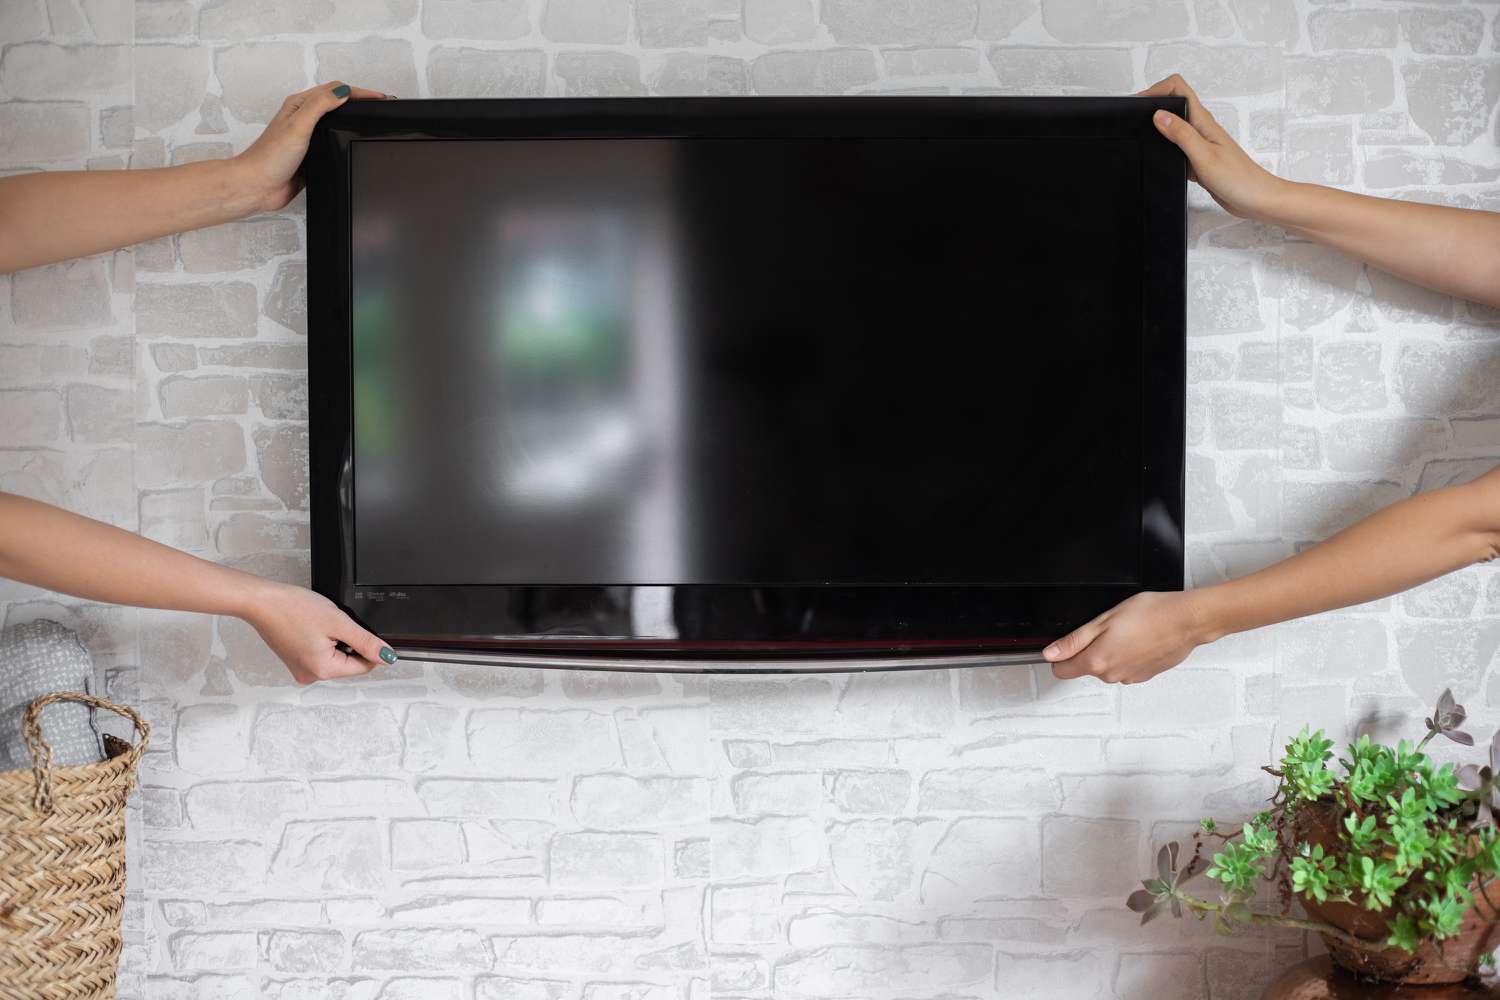 How To Mount A Tv On Brick Without Drilling